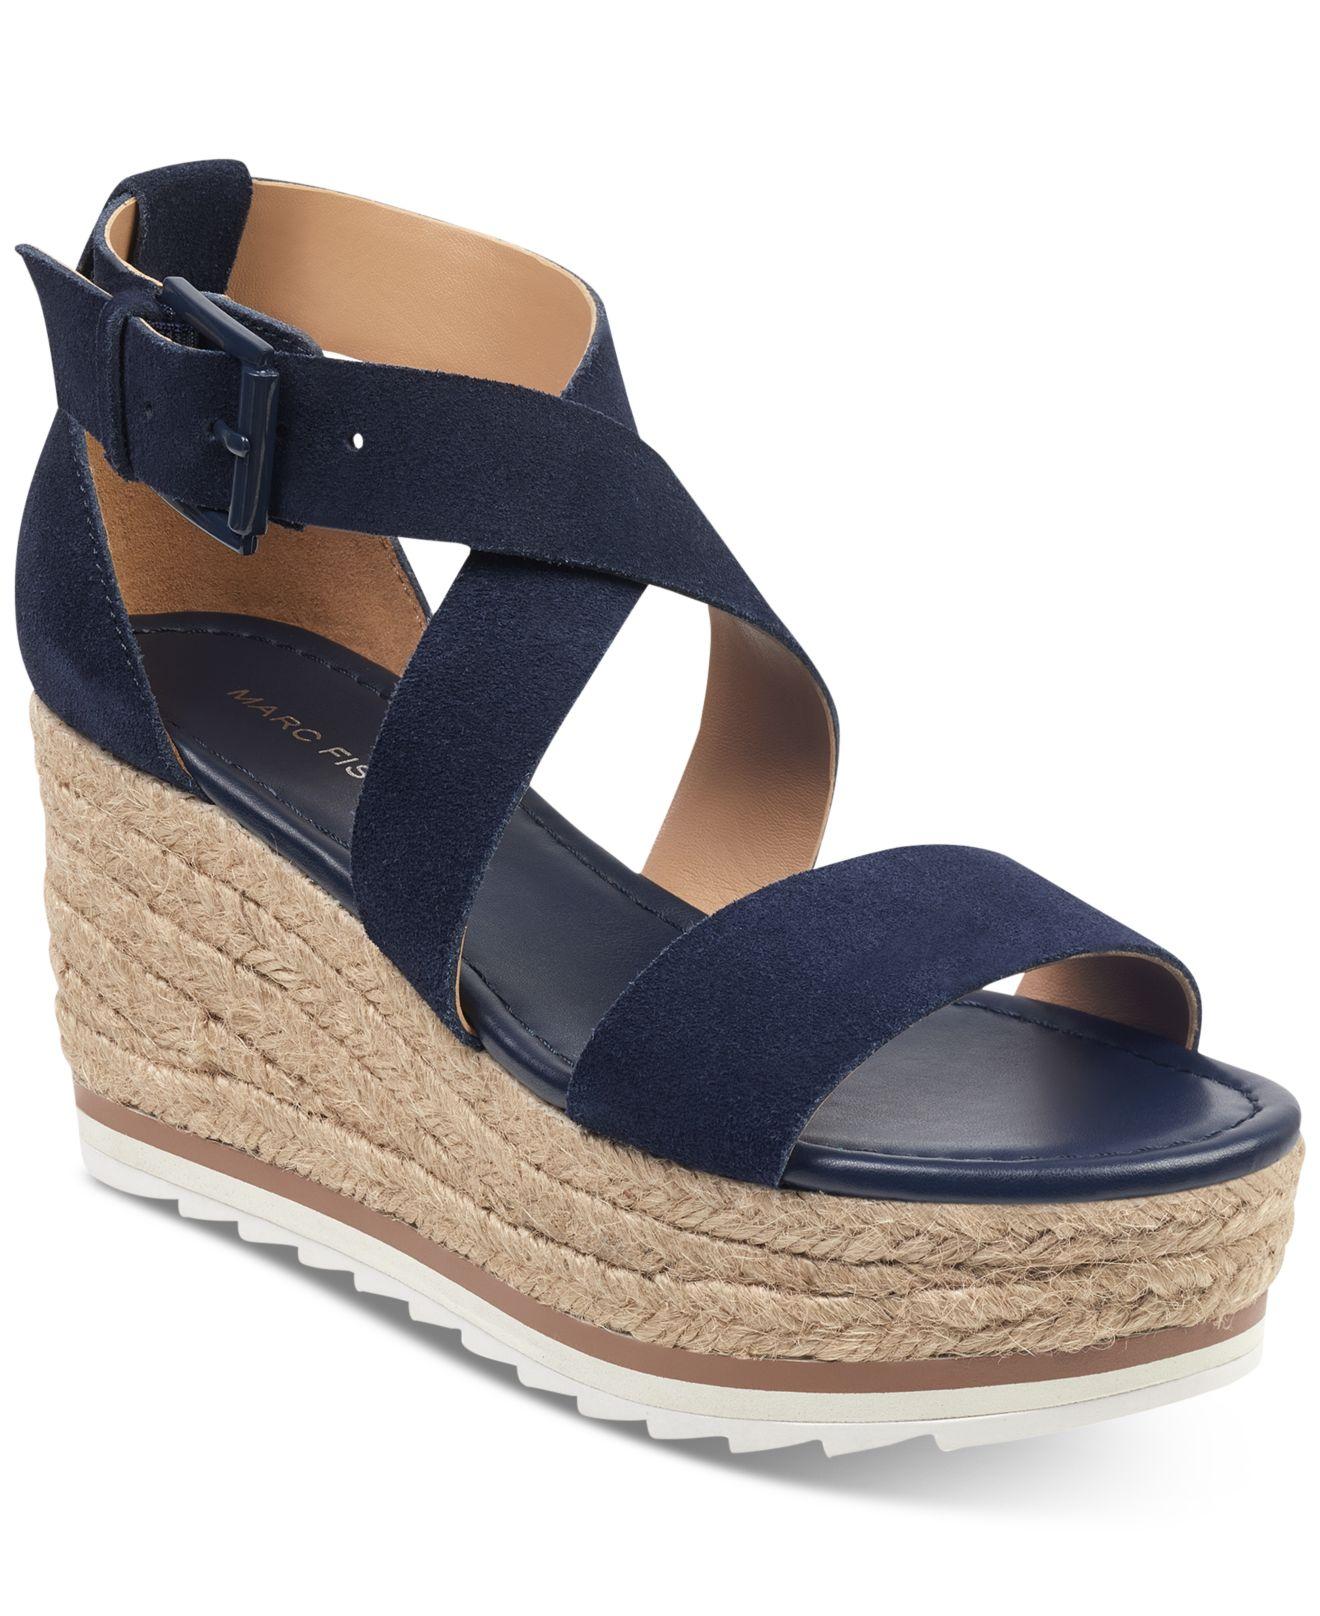 Marc Fisher Leather Zendra Wedge Sandals in Dark Blue Suede (Blue) - Lyst